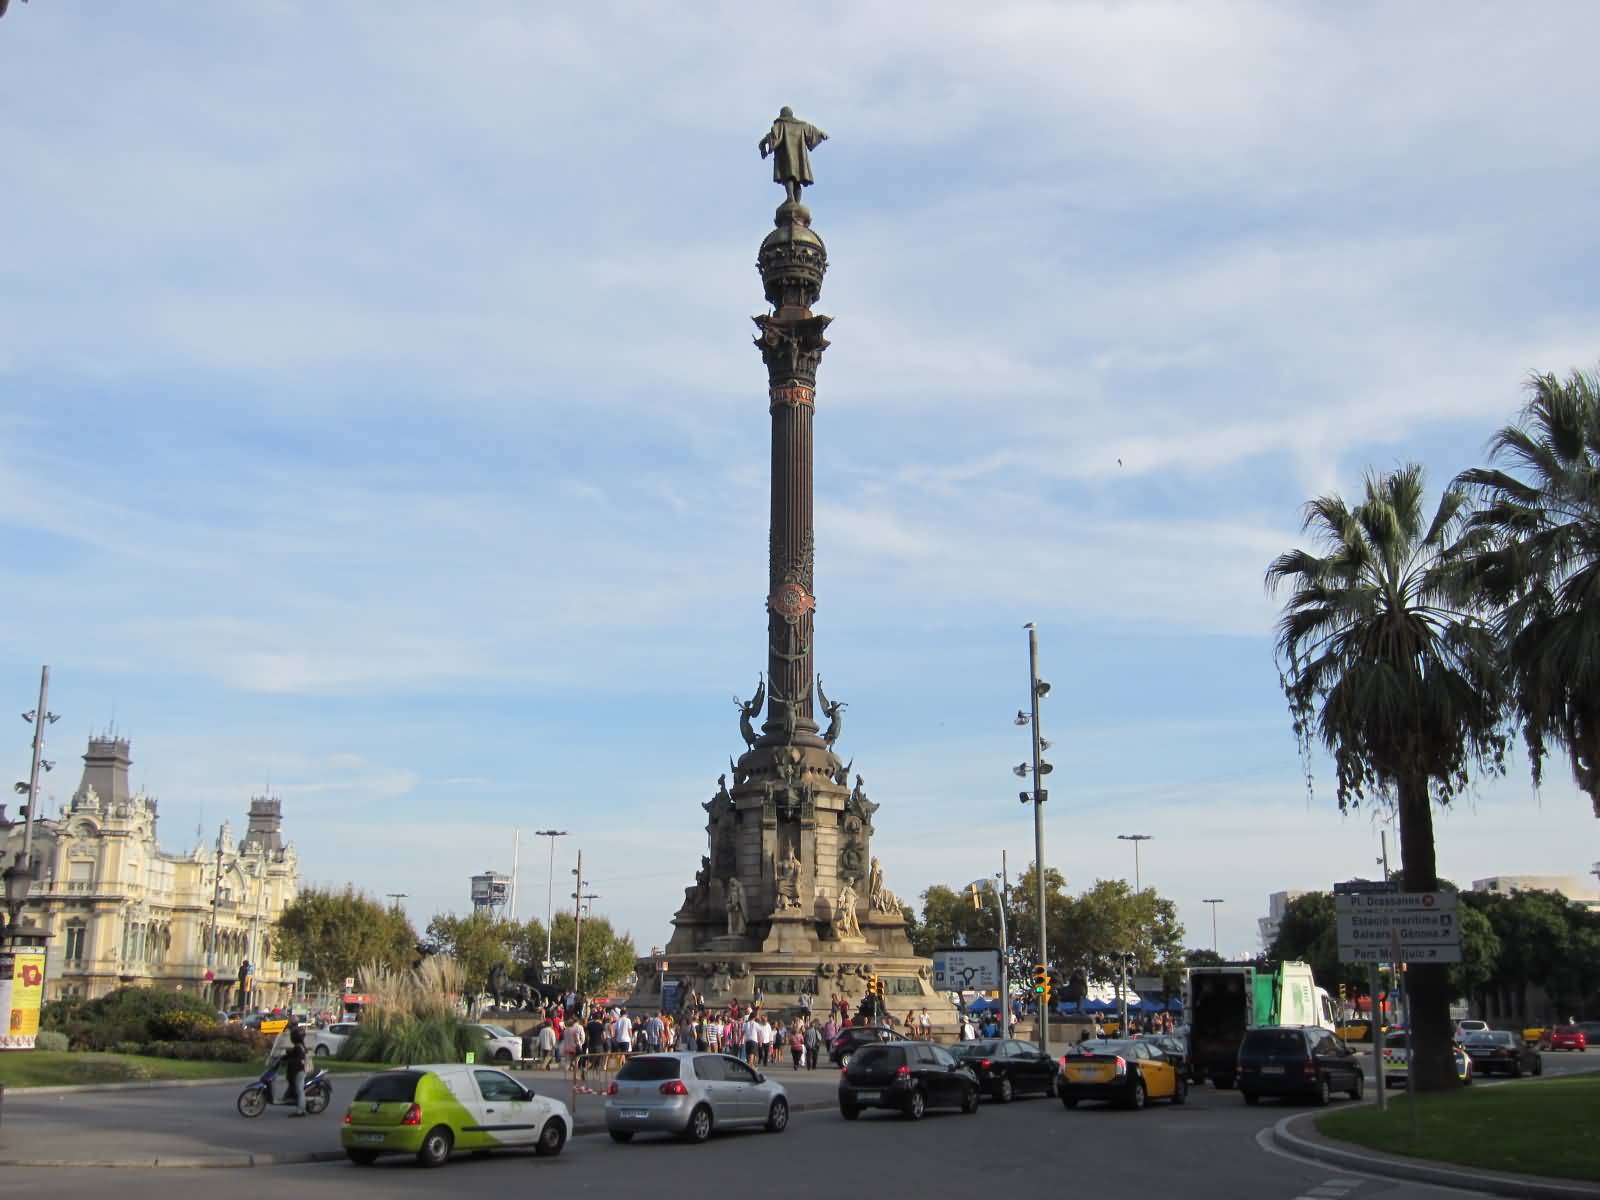 Back Side View Of The Columbus Monument In Barcelona